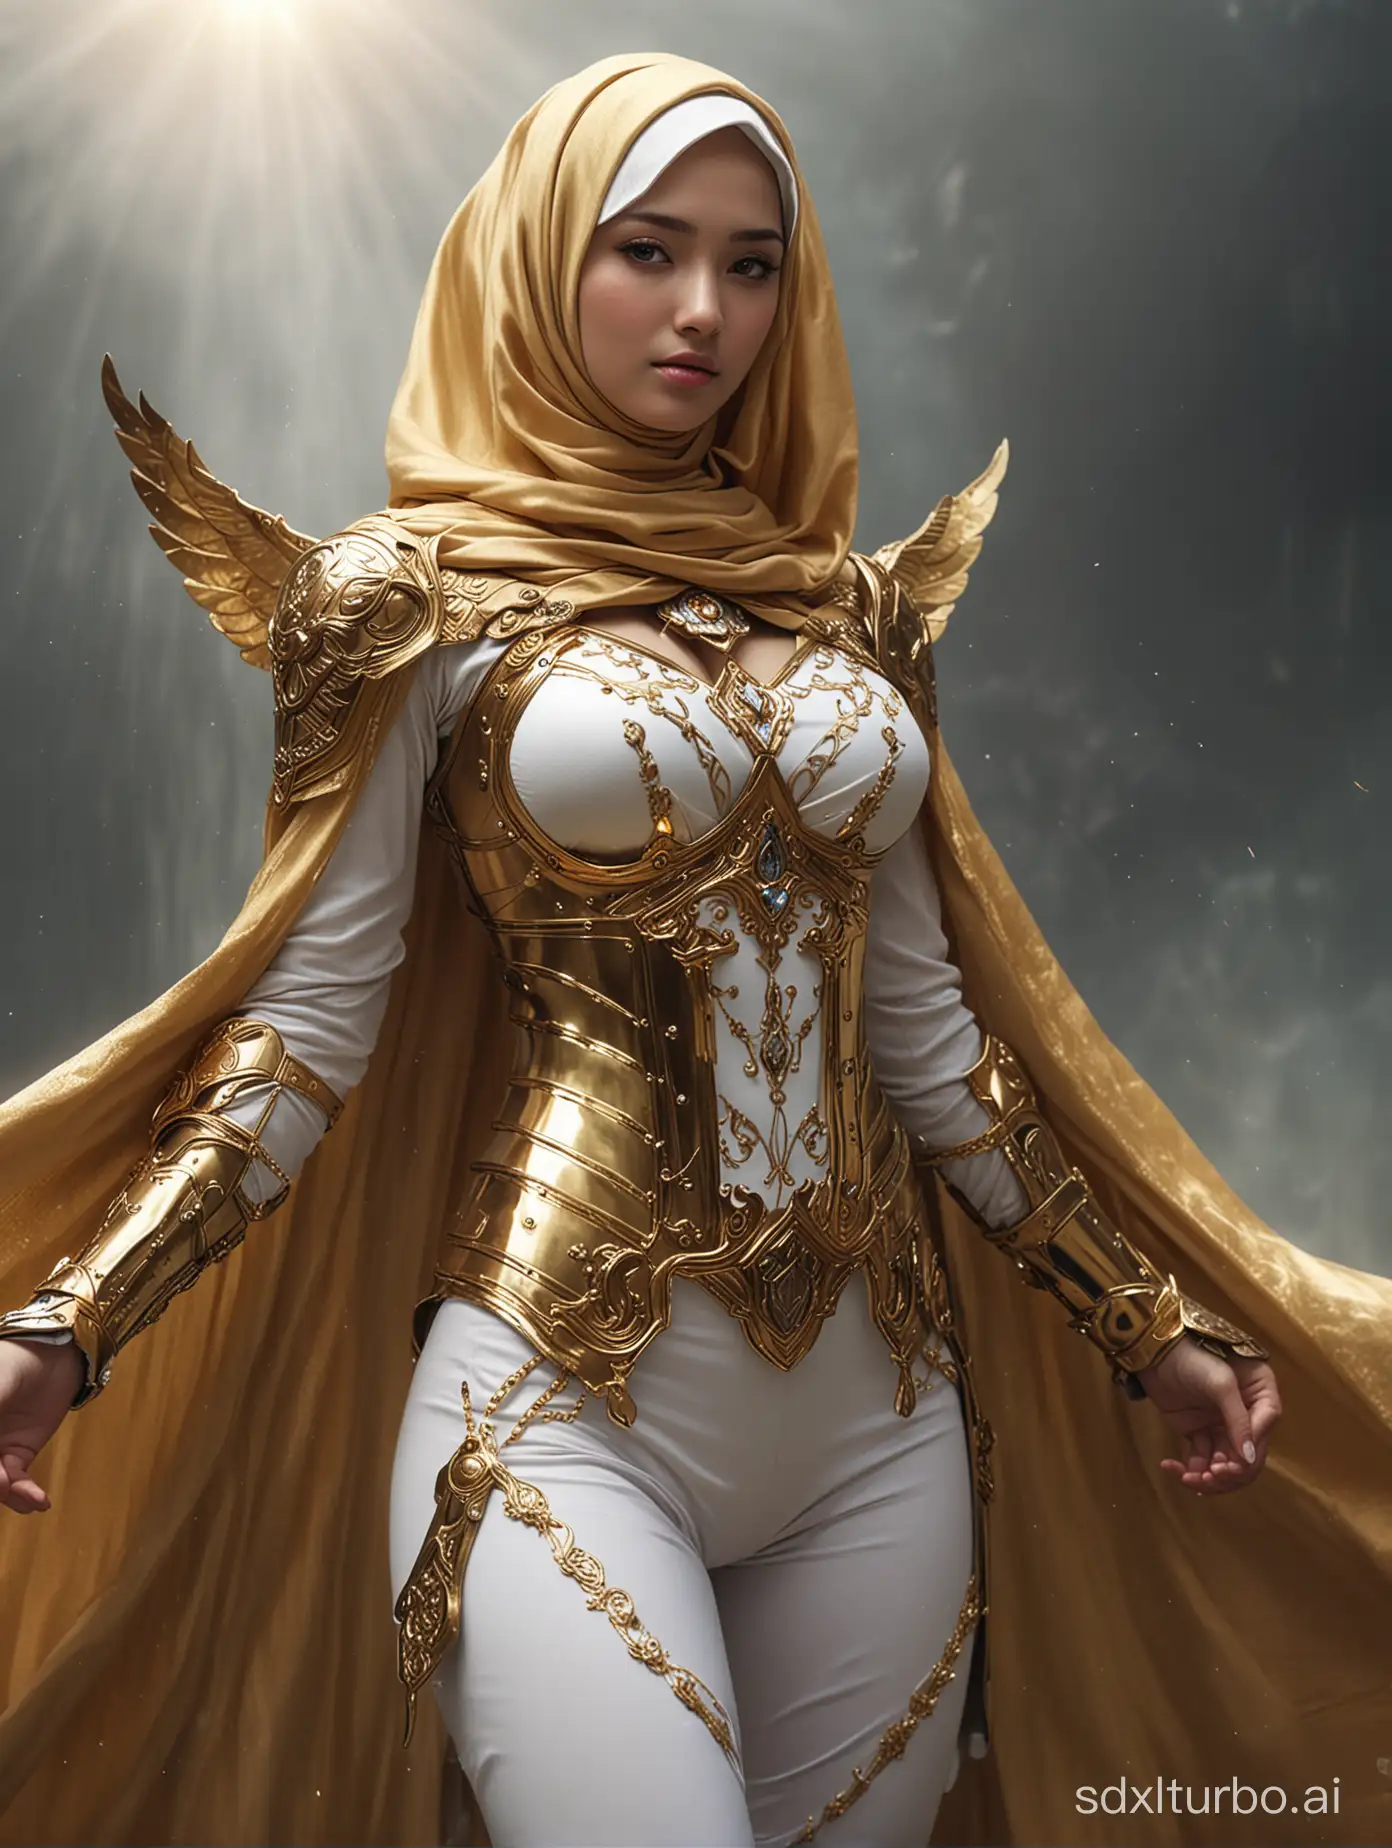 Glamorous-Hijab-Cosplay-Mystical-Valkyrie-with-Fiery-Wings